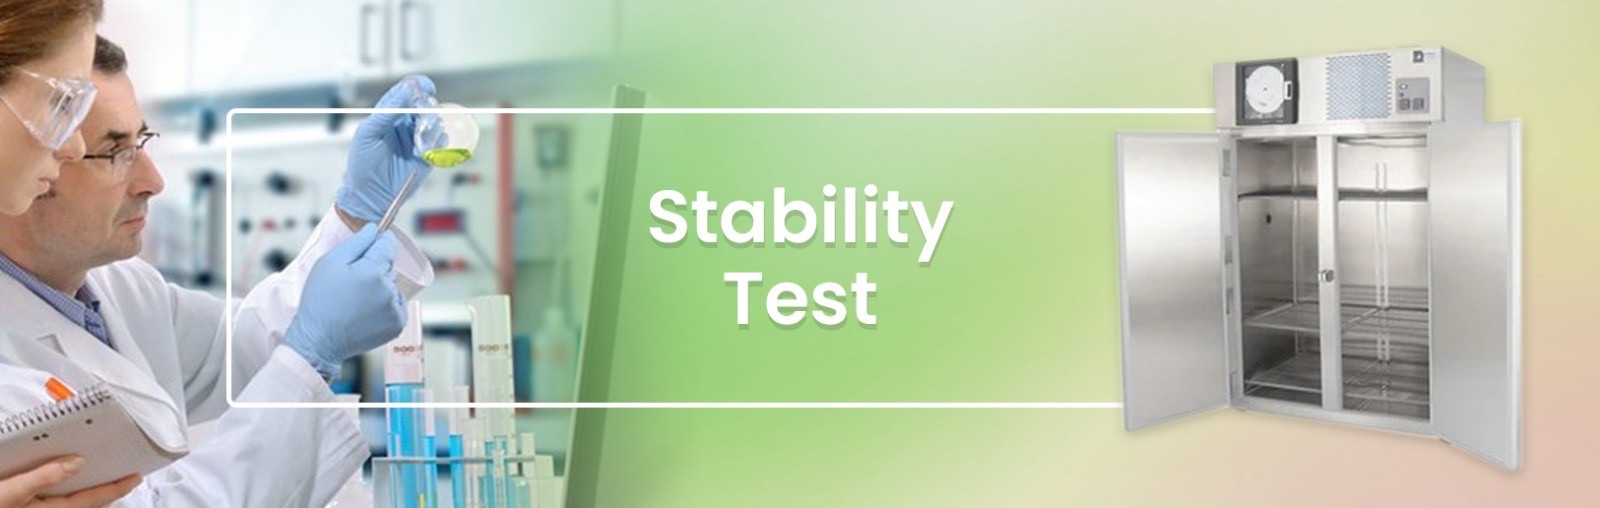 Stability Testing﻿ Service for cosmetics and food formulation